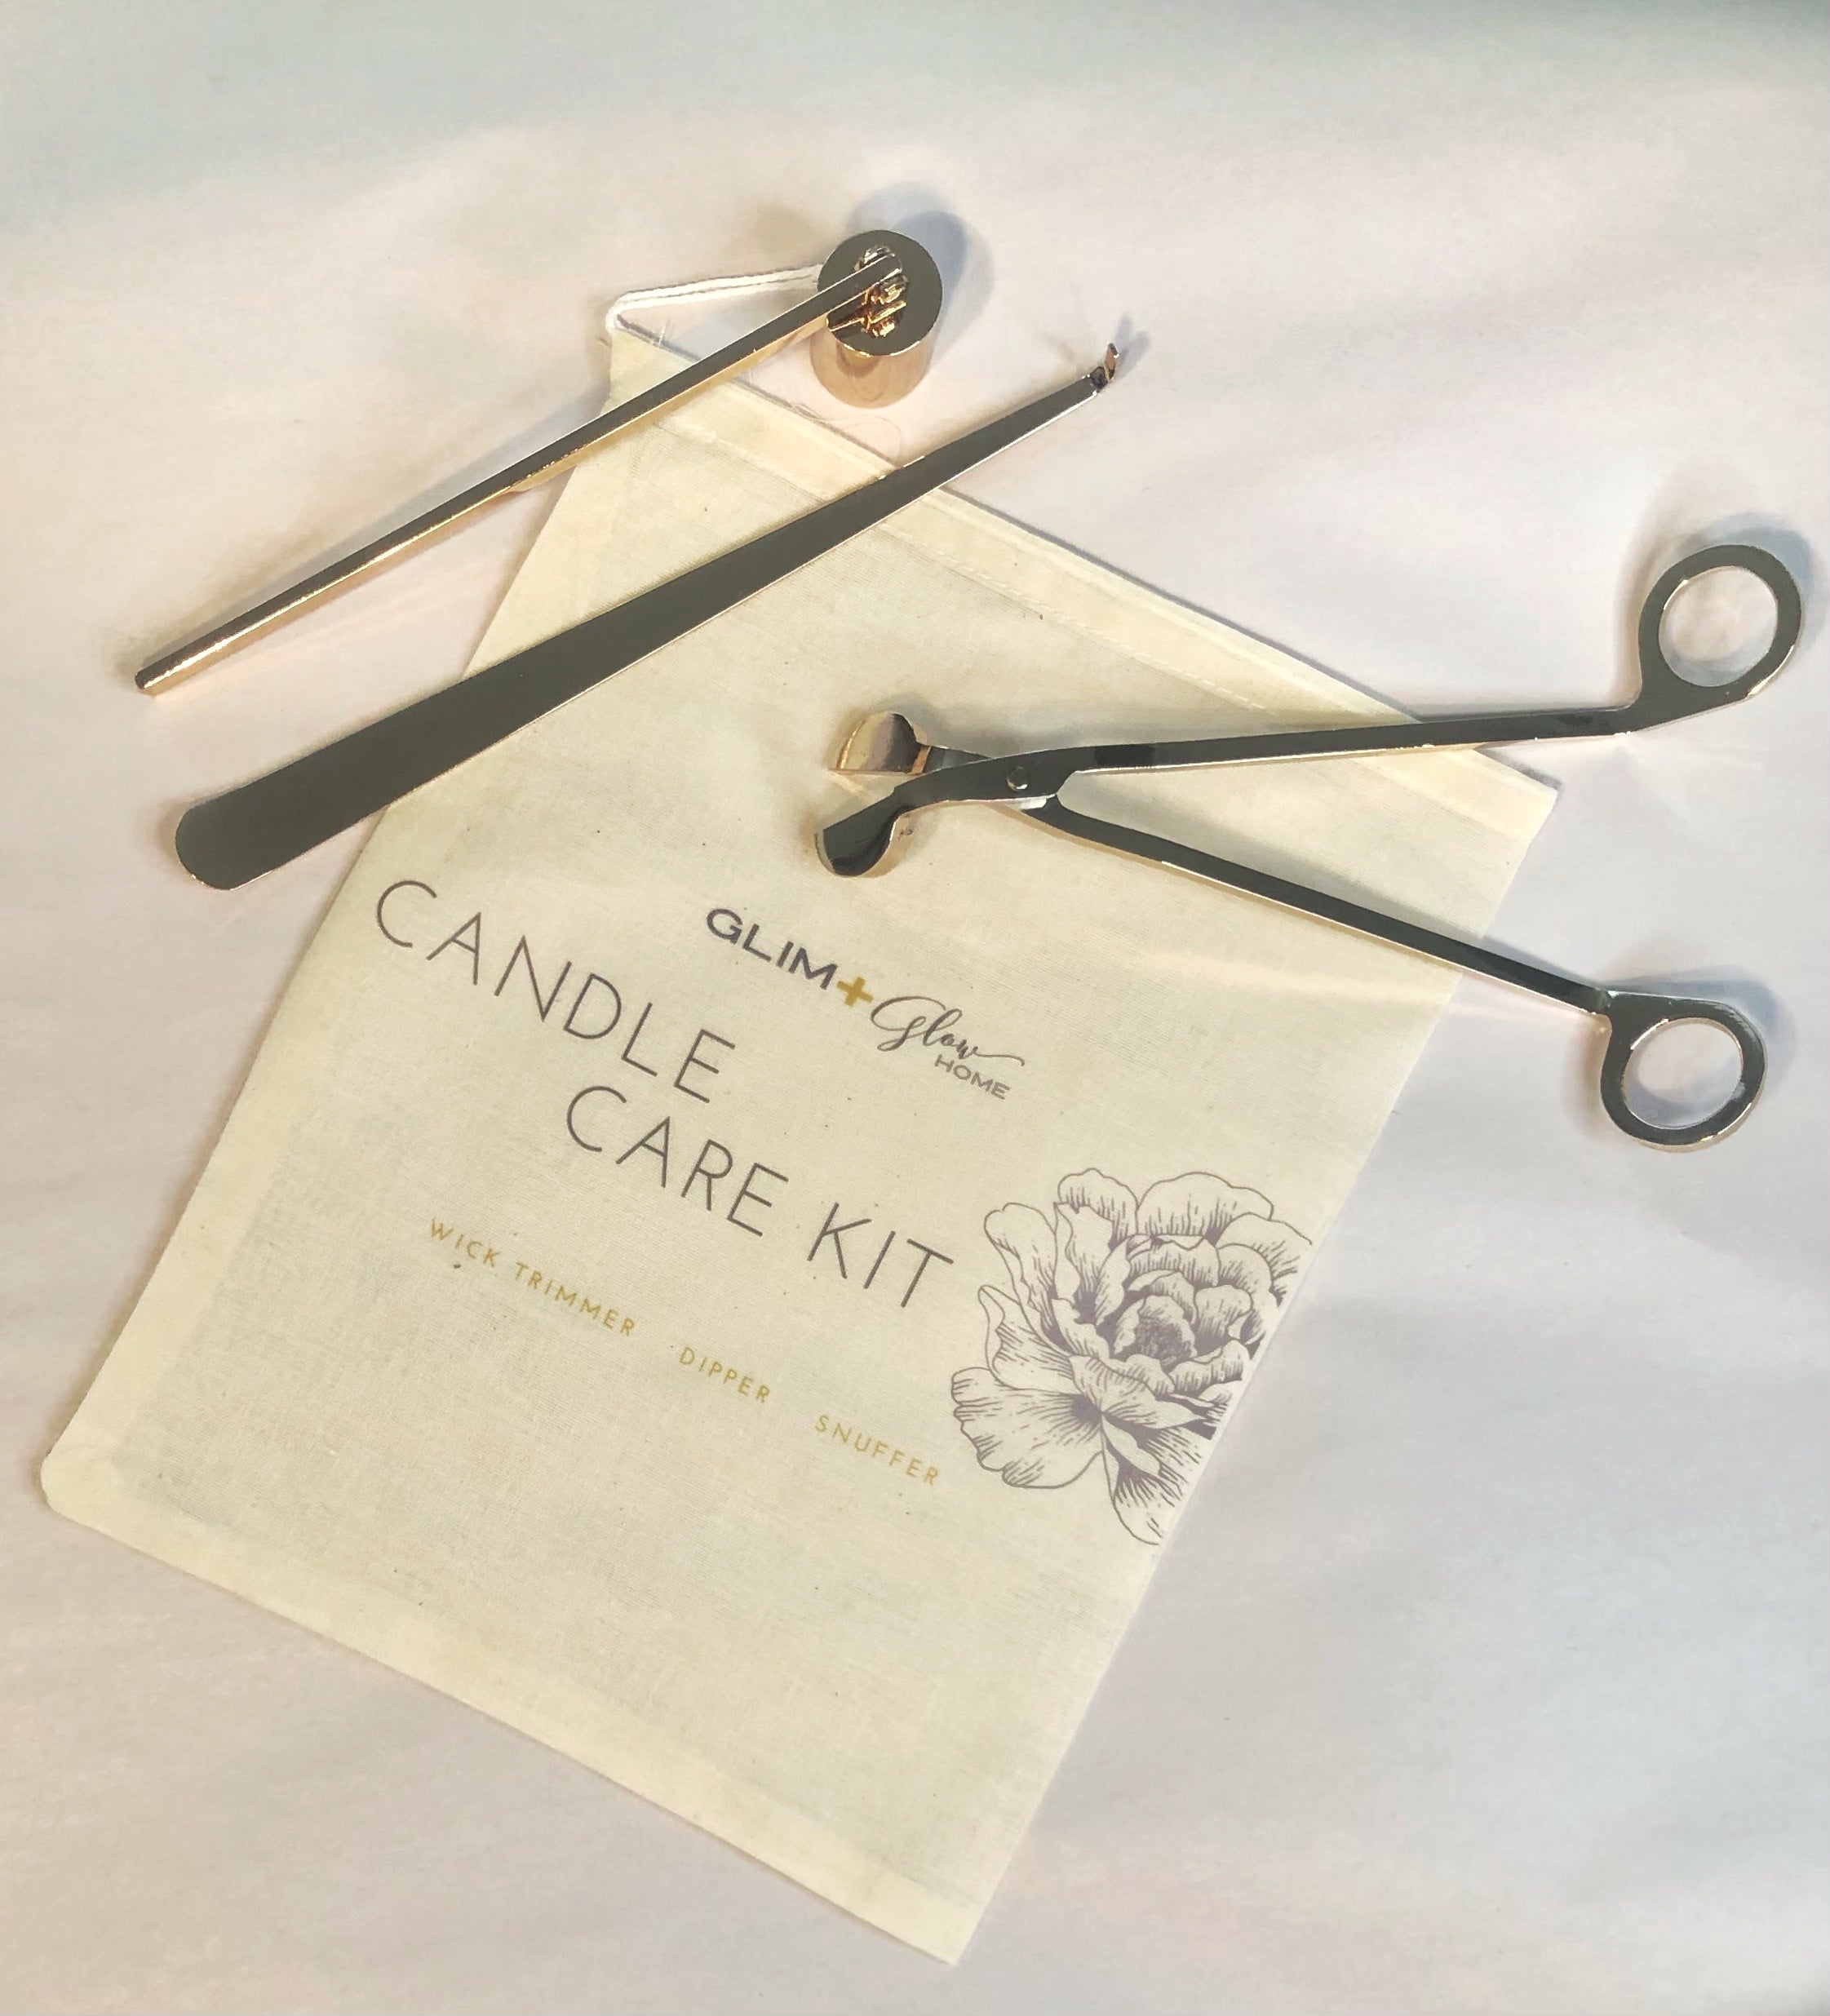 Candle Care Kit - Wick Trimmer, Wick Dipper & Snuffer